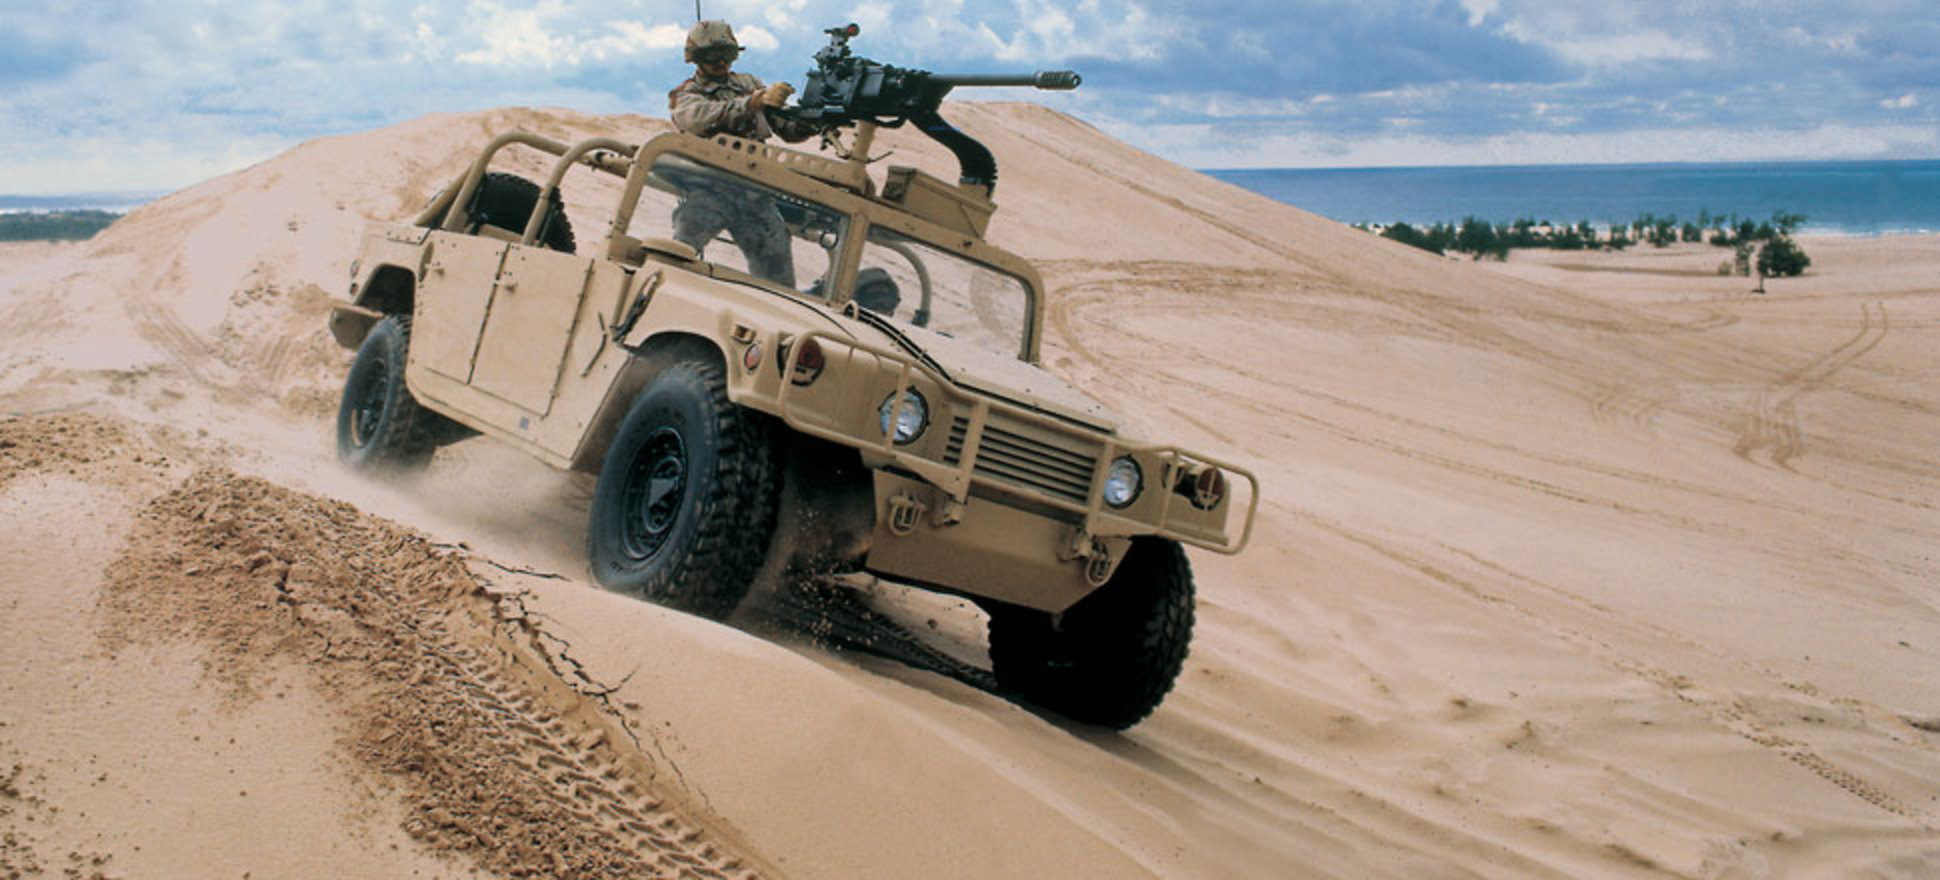 HMMWV (Humvee) | AM General LLC - Mobility solutions for the 21st ...